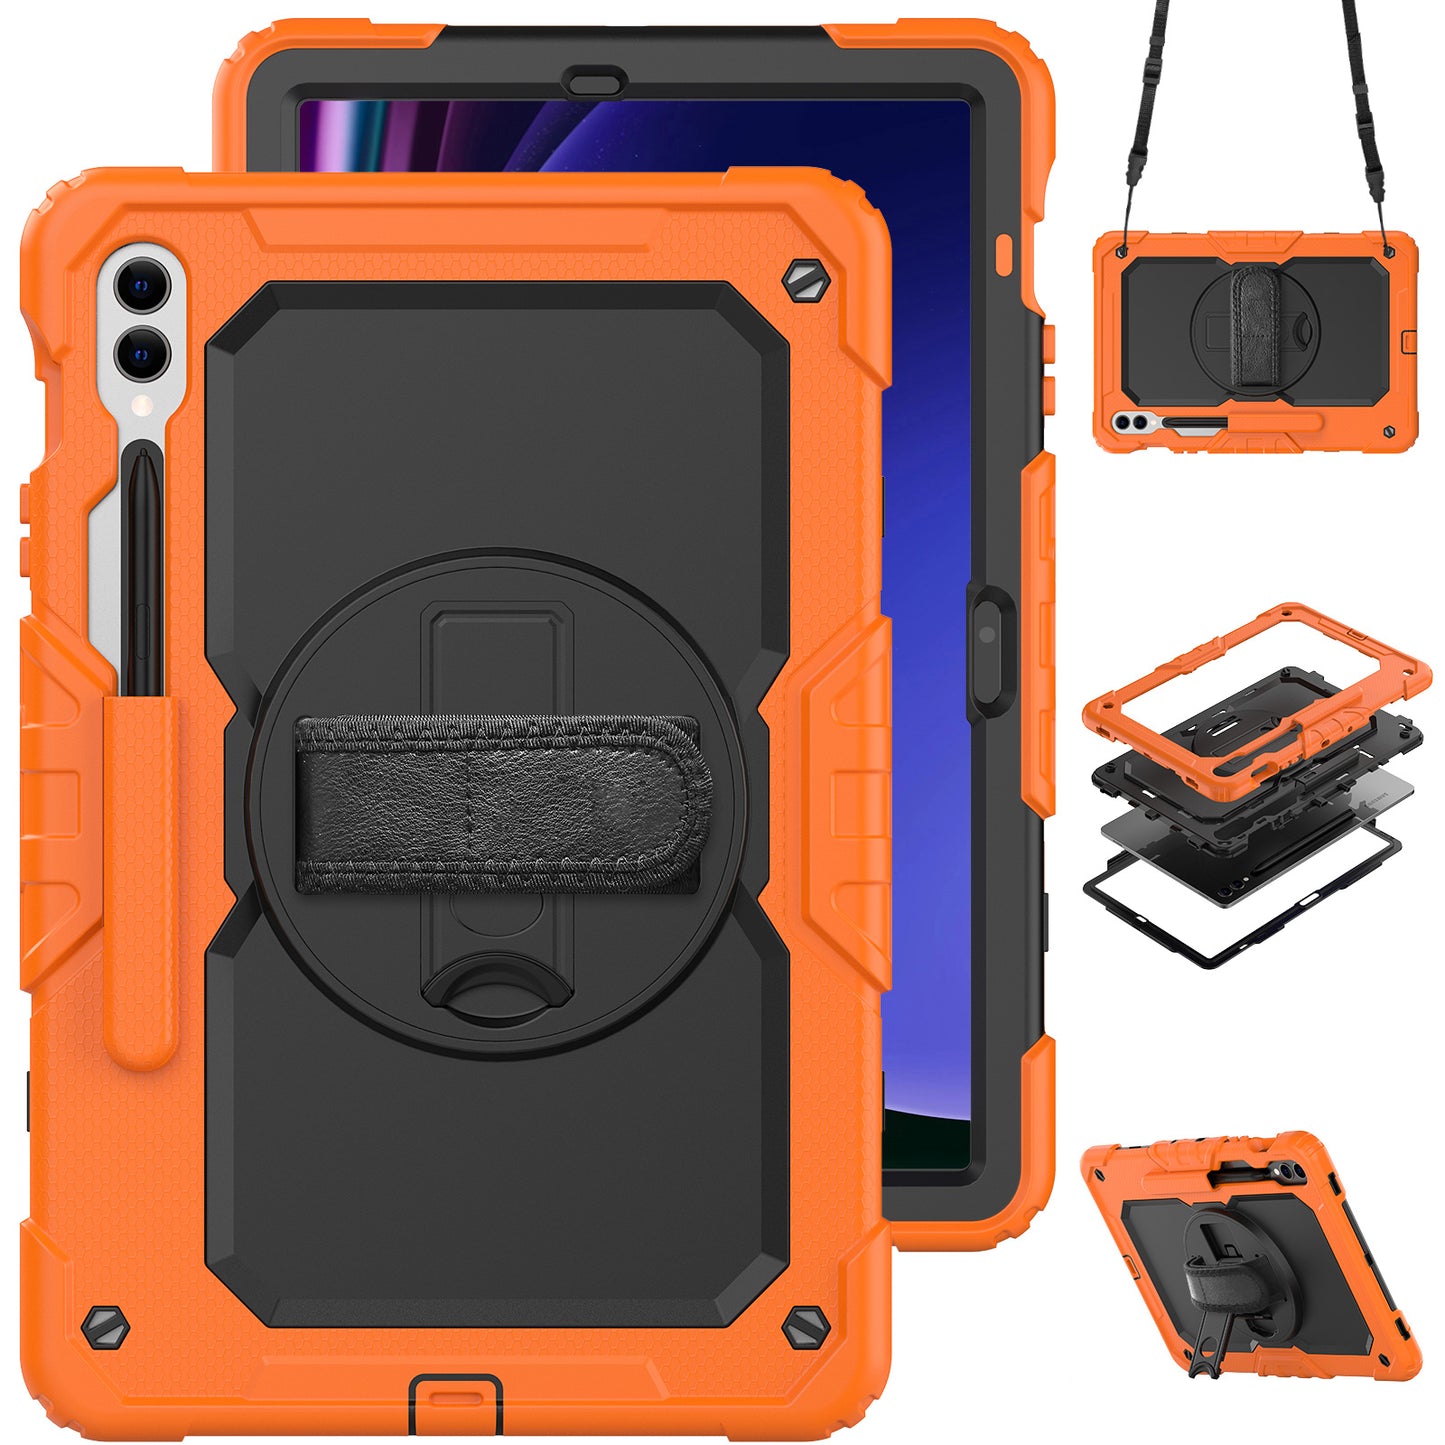 Tough Strap Galaxy Tab S9 FE+ Shockproof Case Multi-functional Built-in Screen Protector